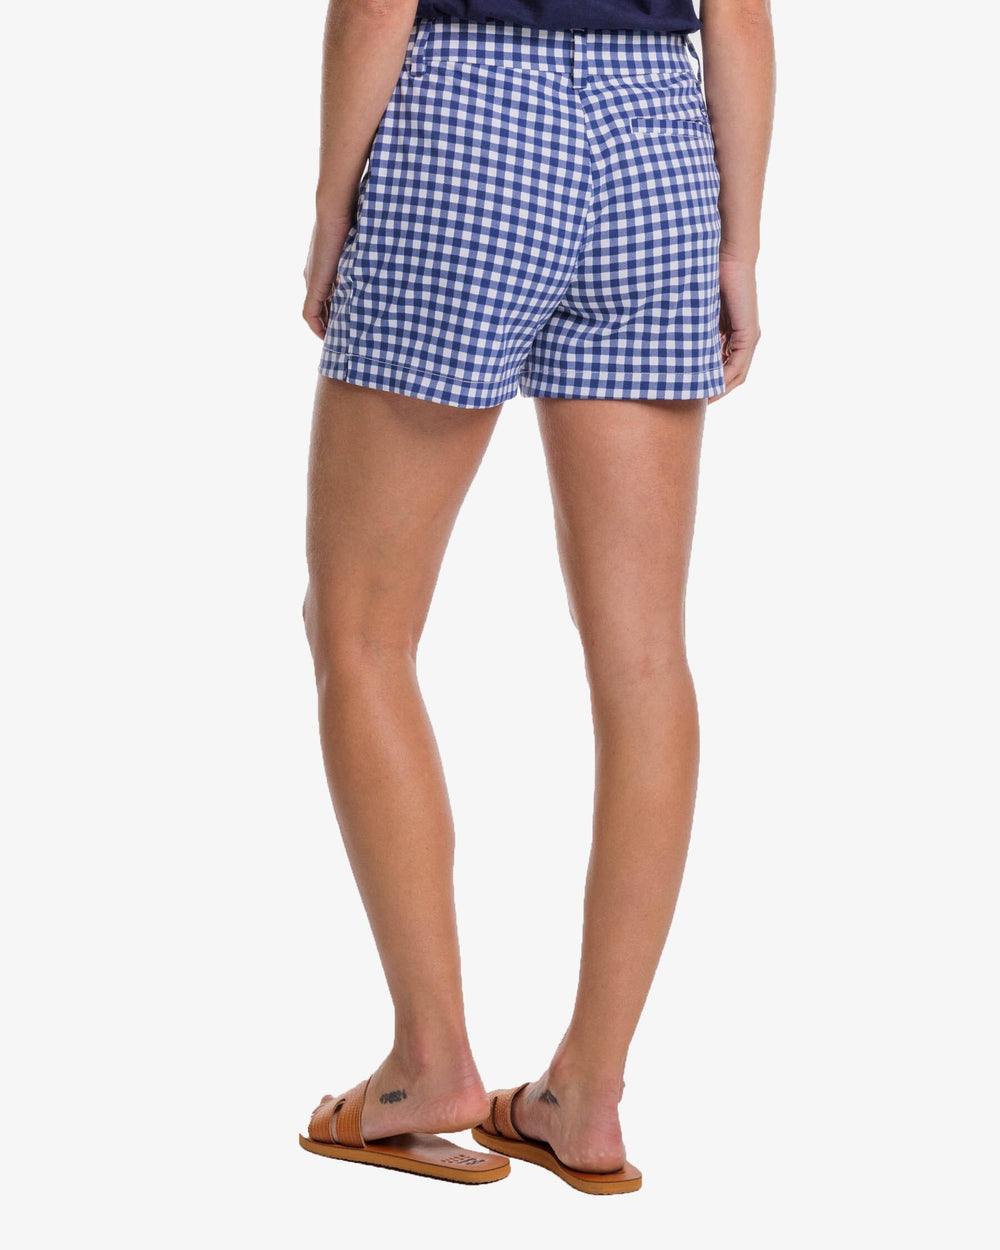 The back view of the Southern Tide Inlet Gingham Performance Short by Southern Tide - Nautical Navy